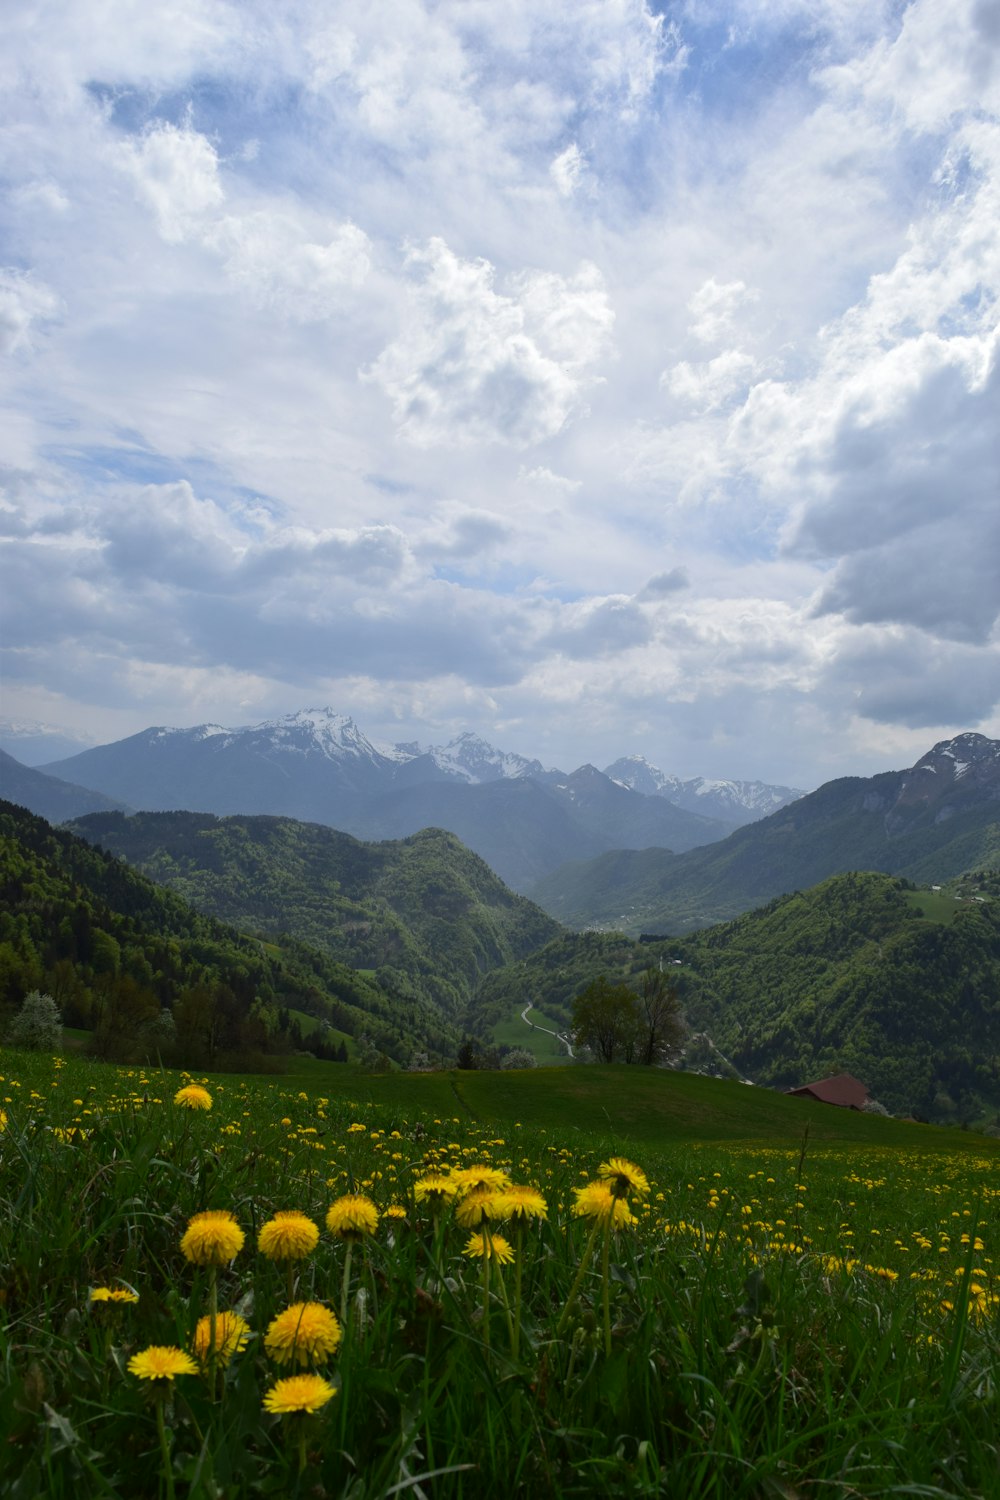 yellow flower field near green mountains under white clouds during daytime